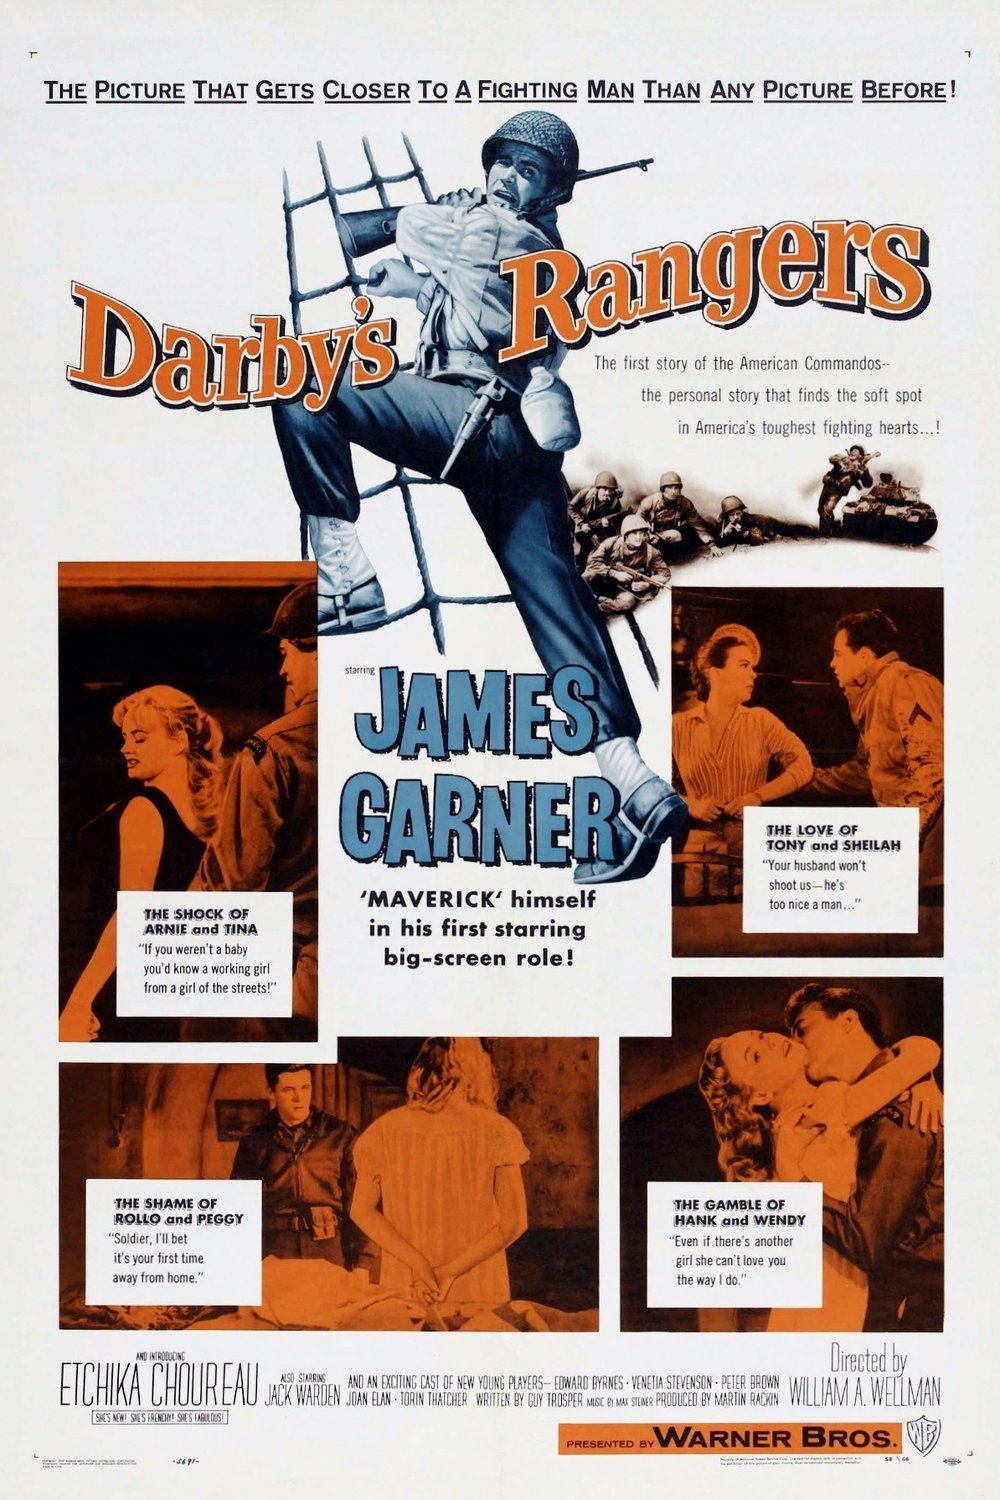 Poster of the movie Darby's Rangers